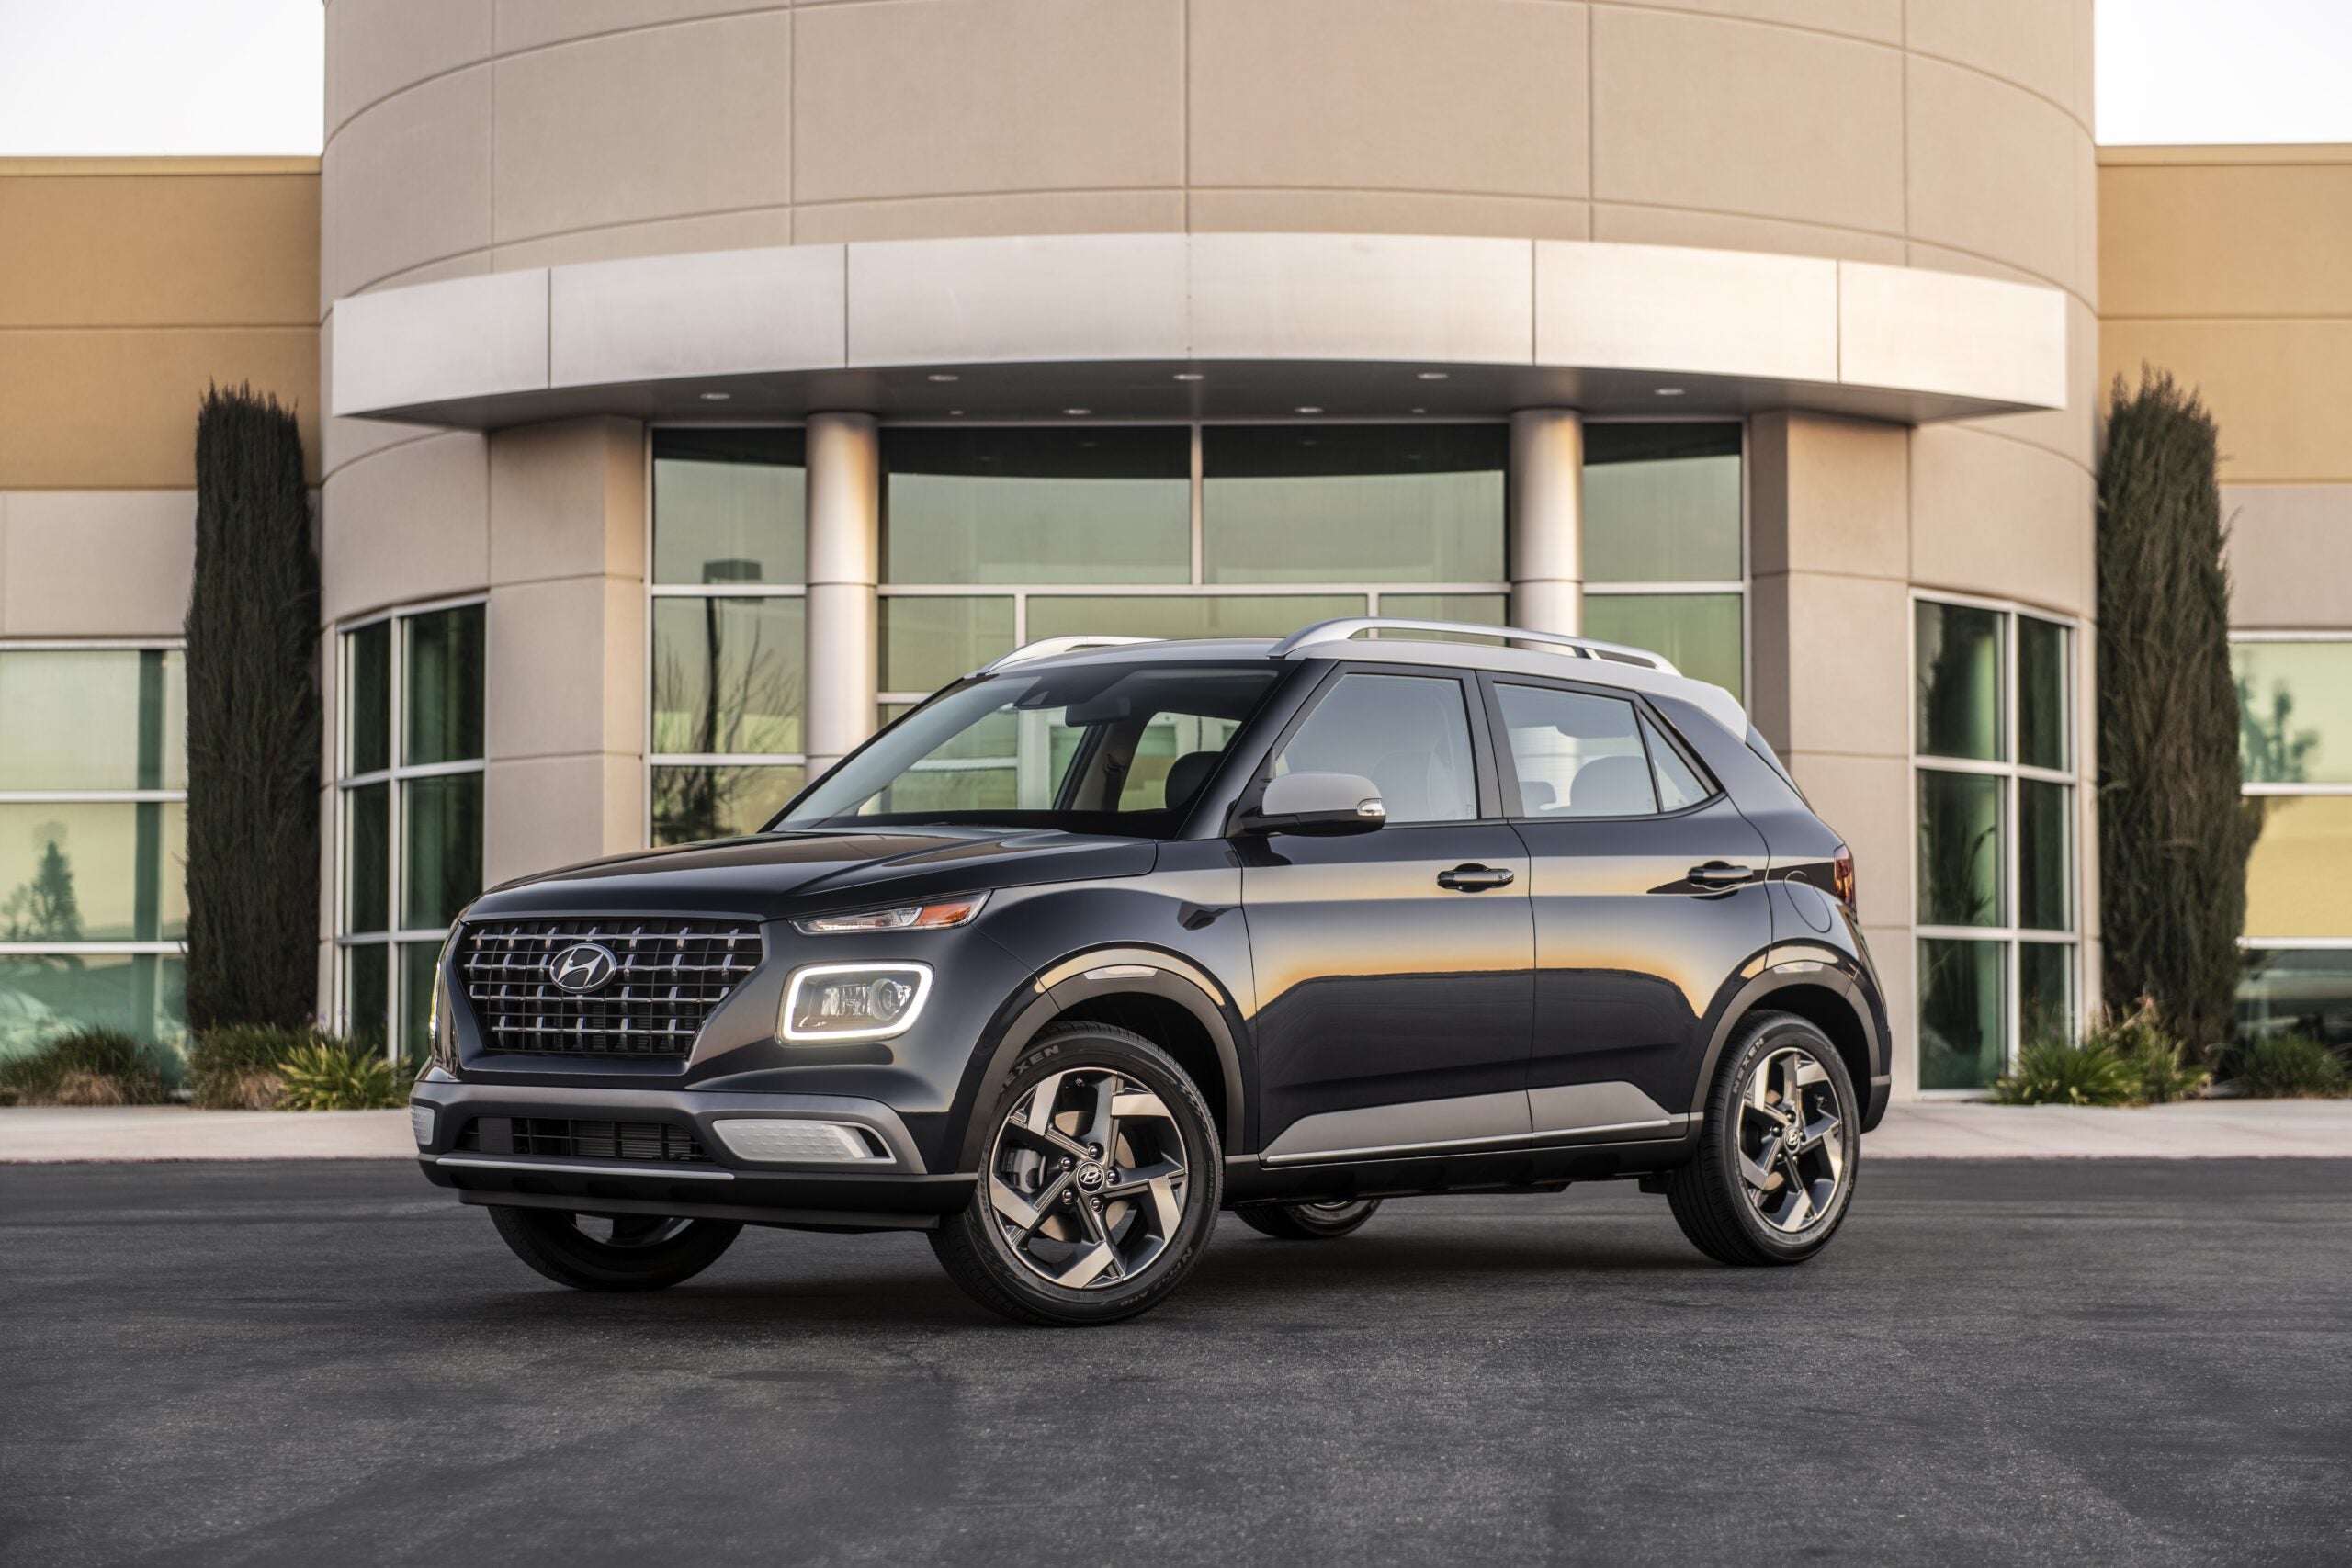 The all-new 2020 Hyundai Venue is an affordable new crossover